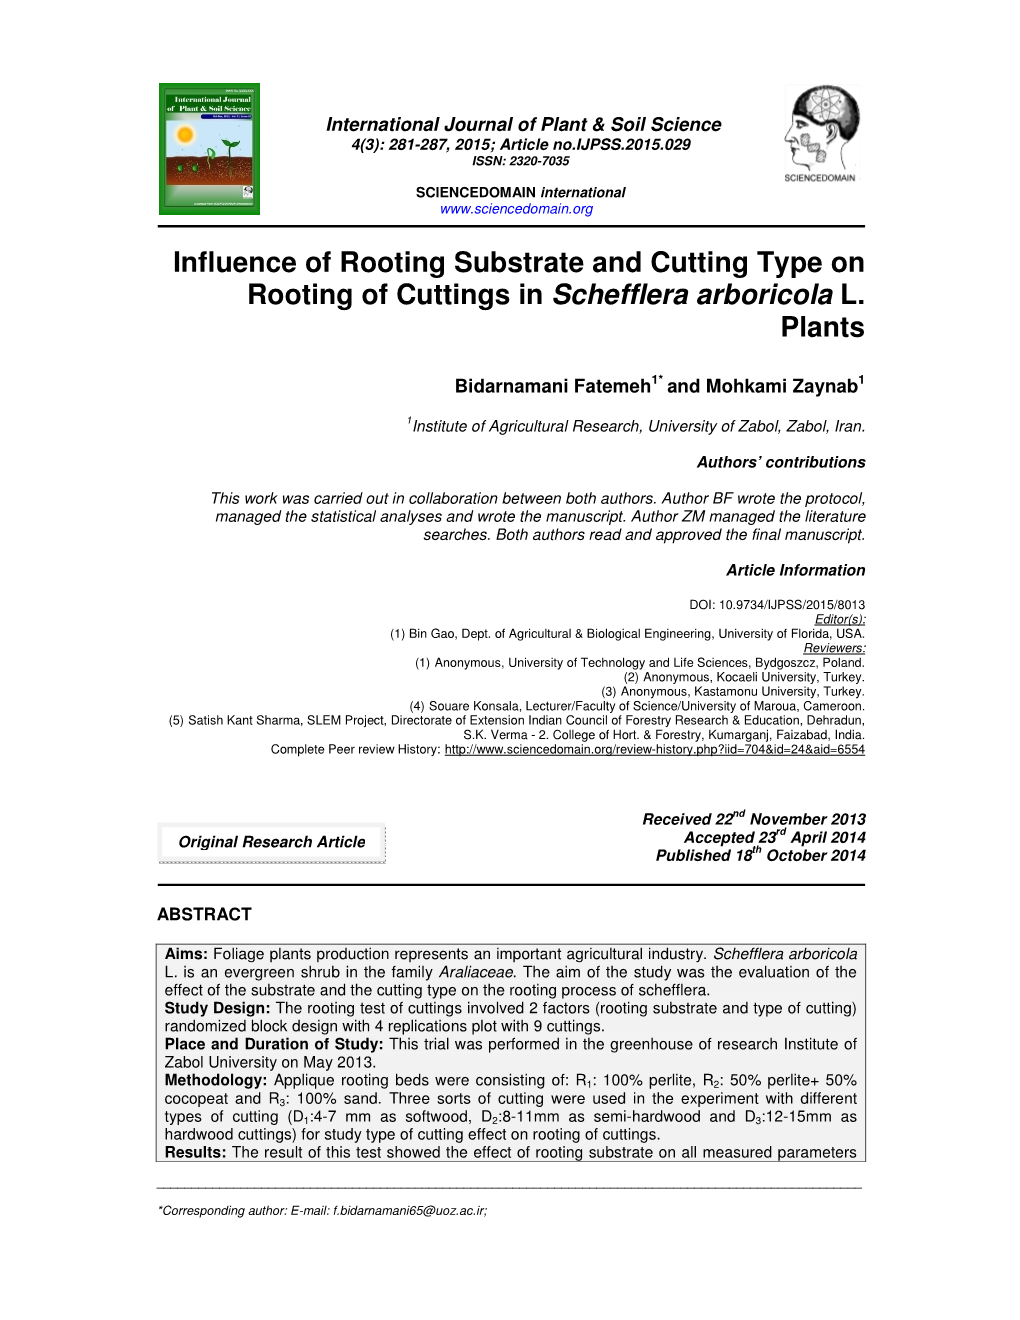 Influence of Rooting Substrate and Cutting Type on Rooting of Cuttings in Schefflera Arboricola L